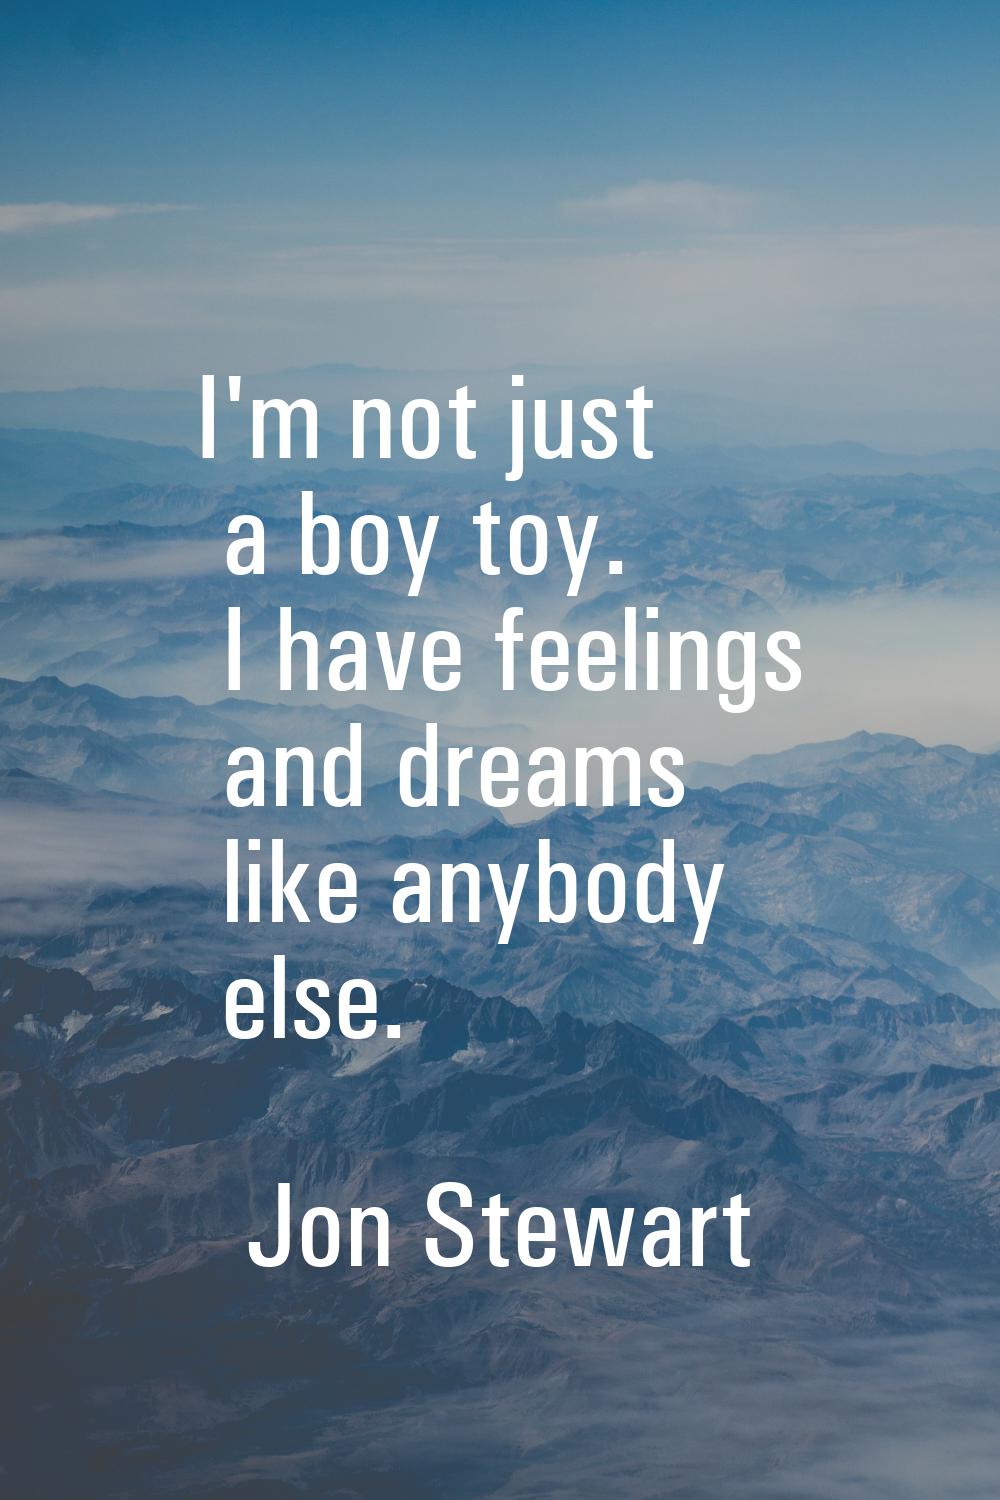 I'm not just a boy toy. I have feelings and dreams like anybody else.